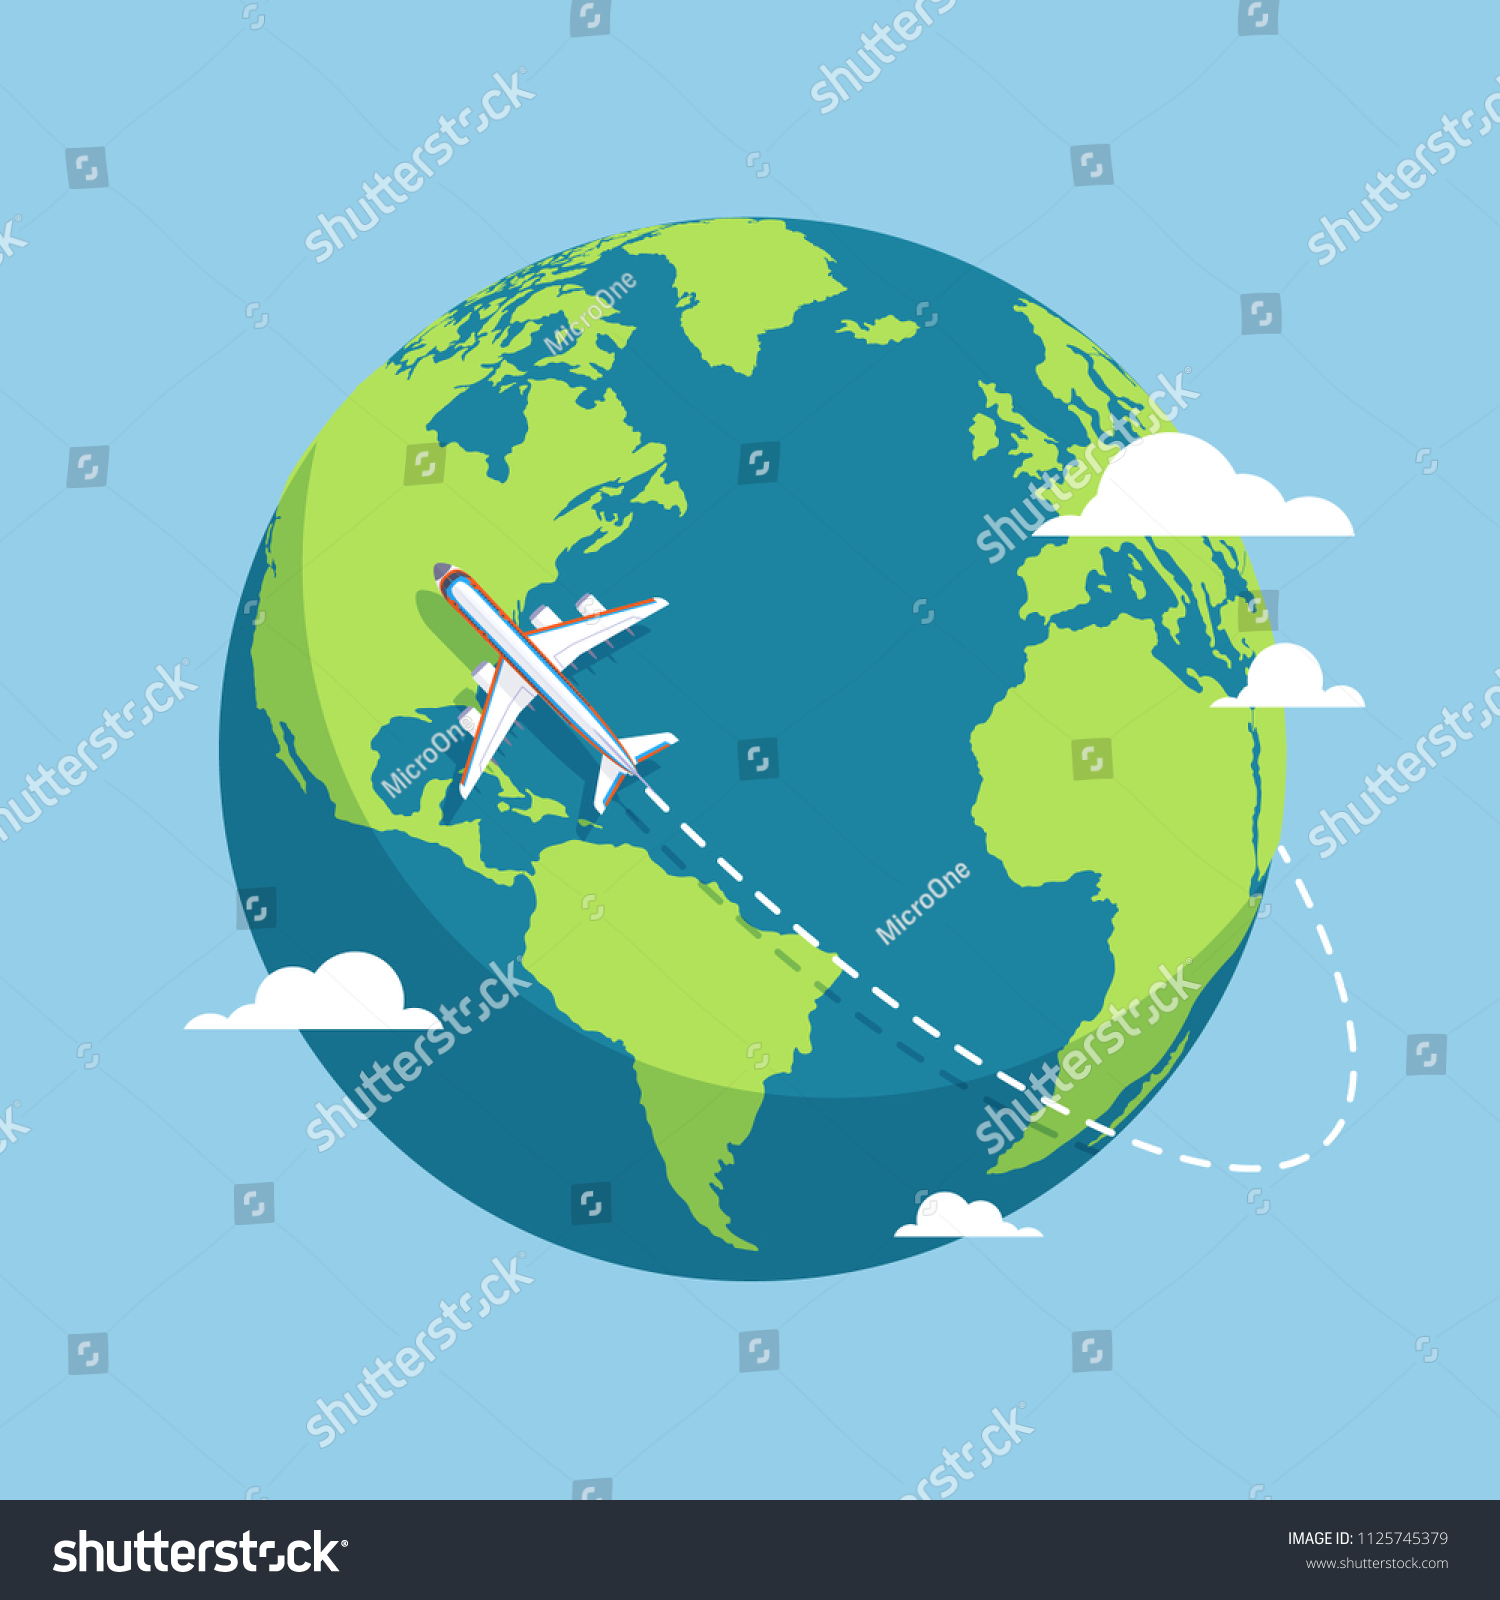 Plane Globe Aircraft Flying Around Earth Stock Vector (Royalty Free ...